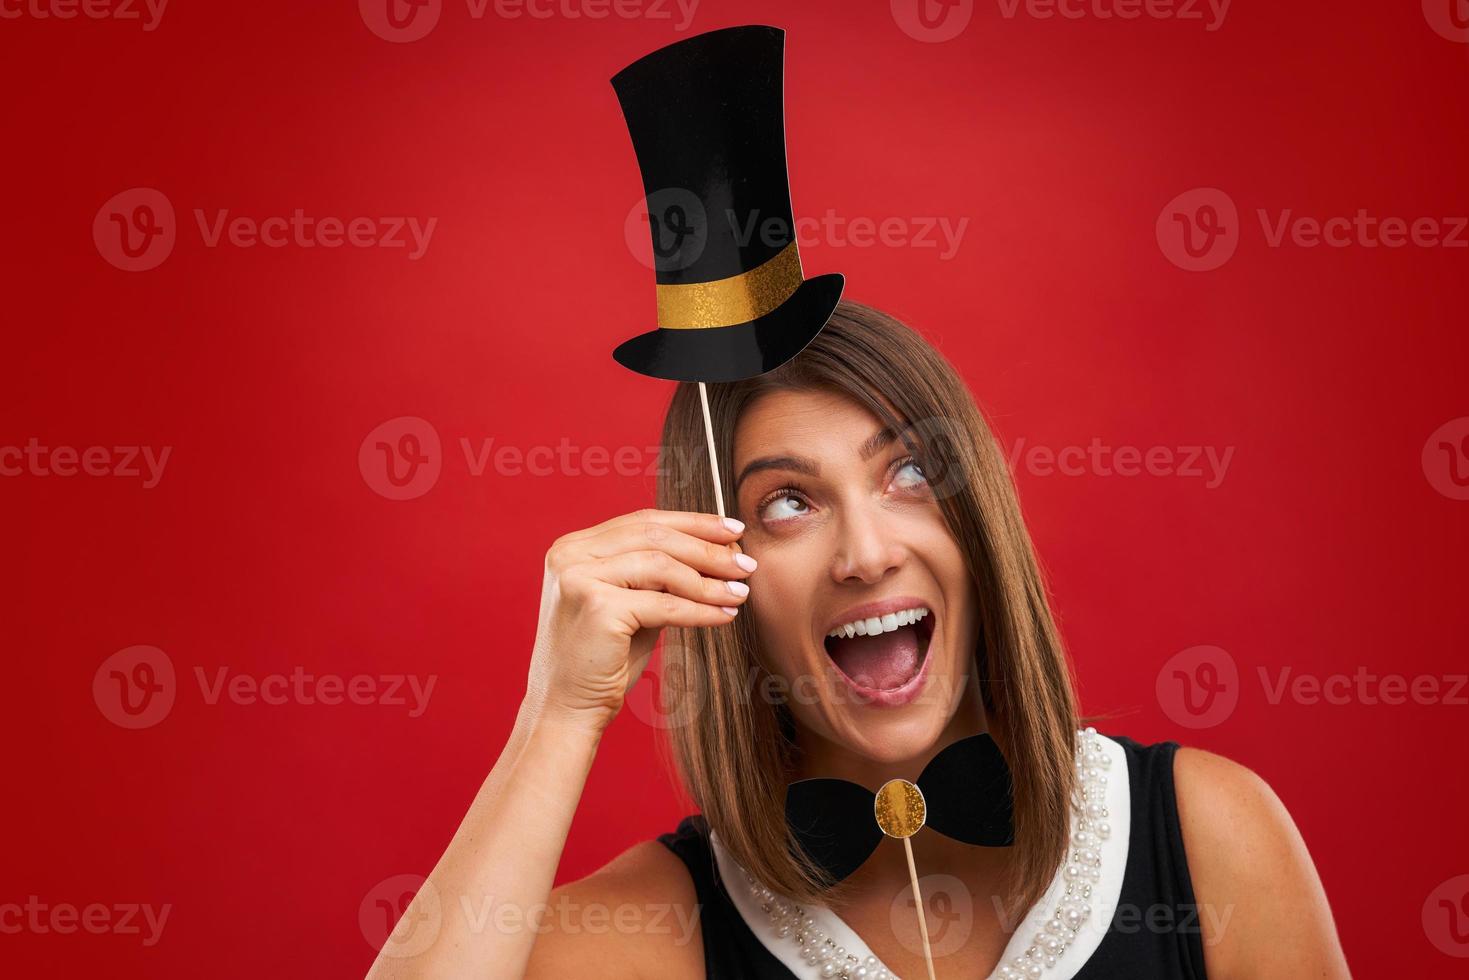 Attractive brunette woman posing with New Year photo gadgets over red background